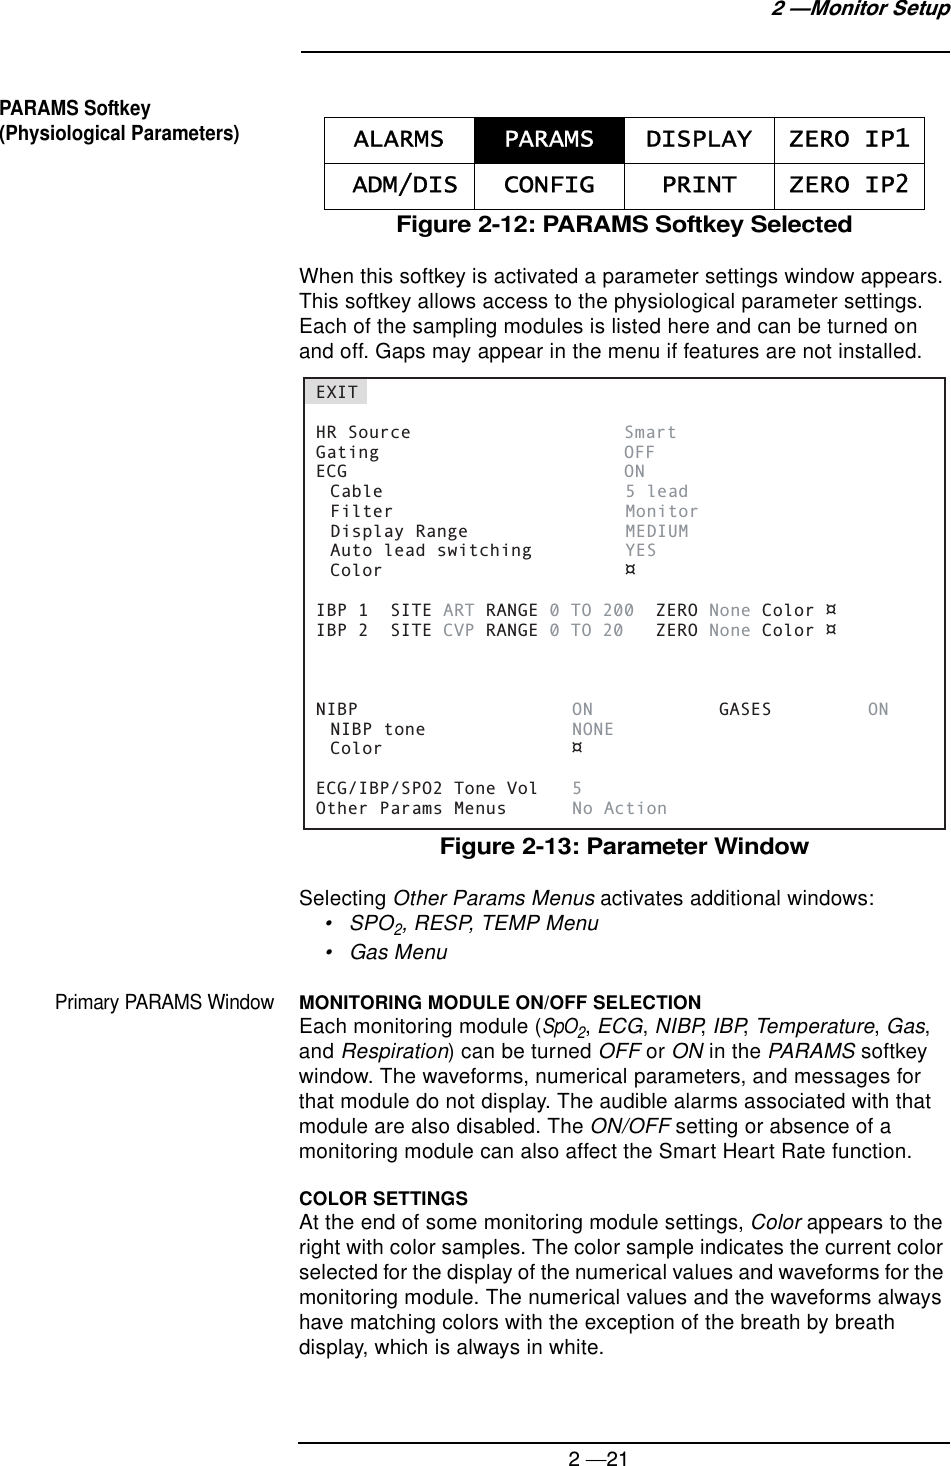 2 —212 —Monitor SetupPARAMS Softkey (Physiological Parameters)Figure 2-12: PARAMS Softkey SelectedWhen this softkey is activated a parameter settings window appears. This softkey allows access to the physiological parameter settings. Each of the sampling modules is listed here and can be turned on and off. Gaps may appear in the menu if features are not installed.Figure 2-13: Parameter WindowSelecting Other Params Menus activates additional windows:•SPO2, RESP, TEMP Menu• Gas MenuPrimary PARAMS WindowMONITORING MODULE ON/OFF SELECTIONEach monitoring module (SpO2, ECG, NIBP, IBP, Temperature, Gas, and Respiration) can be turned OFF or ON in the PARAMS softkey window. The waveforms, numerical parameters, and messages for that module do not display. The audible alarms associated with that module are also disabled. The ON/OFF setting or absence of a monitoring module can also affect the Smart Heart Rate function.COLOR SETTINGSAt the end of some monitoring module settings, Color appears to the right with color samples. The color sample indicates the current color selected for the display of the numerical values and waveforms for the monitoring module. The numerical values and the waveforms always have matching colors with the exception of the breath by breath display, which is always in white.ALARMS PARAMS DISPLAY ZERO IP1 ADM/DIS CONFIG PRINT ZERO IP2EXITHR Source    SmartGating  OFFECG  ON Cable    5 lead Filter    Monitor Display Range  MEDIUM Auto lead switching    YES Color    ¤IBP 1  SITE ART RANGE 0 TO 200  ZERO None Color ¤IBP 2  SITE CVP RANGE 0 TO 20   ZERO None Color ¤NIBP  ON   GASES ON NIBP tone  NONE Color  ¤ECG/IBP/SPO2 Tone Vol  5Other Params Menus  No Action